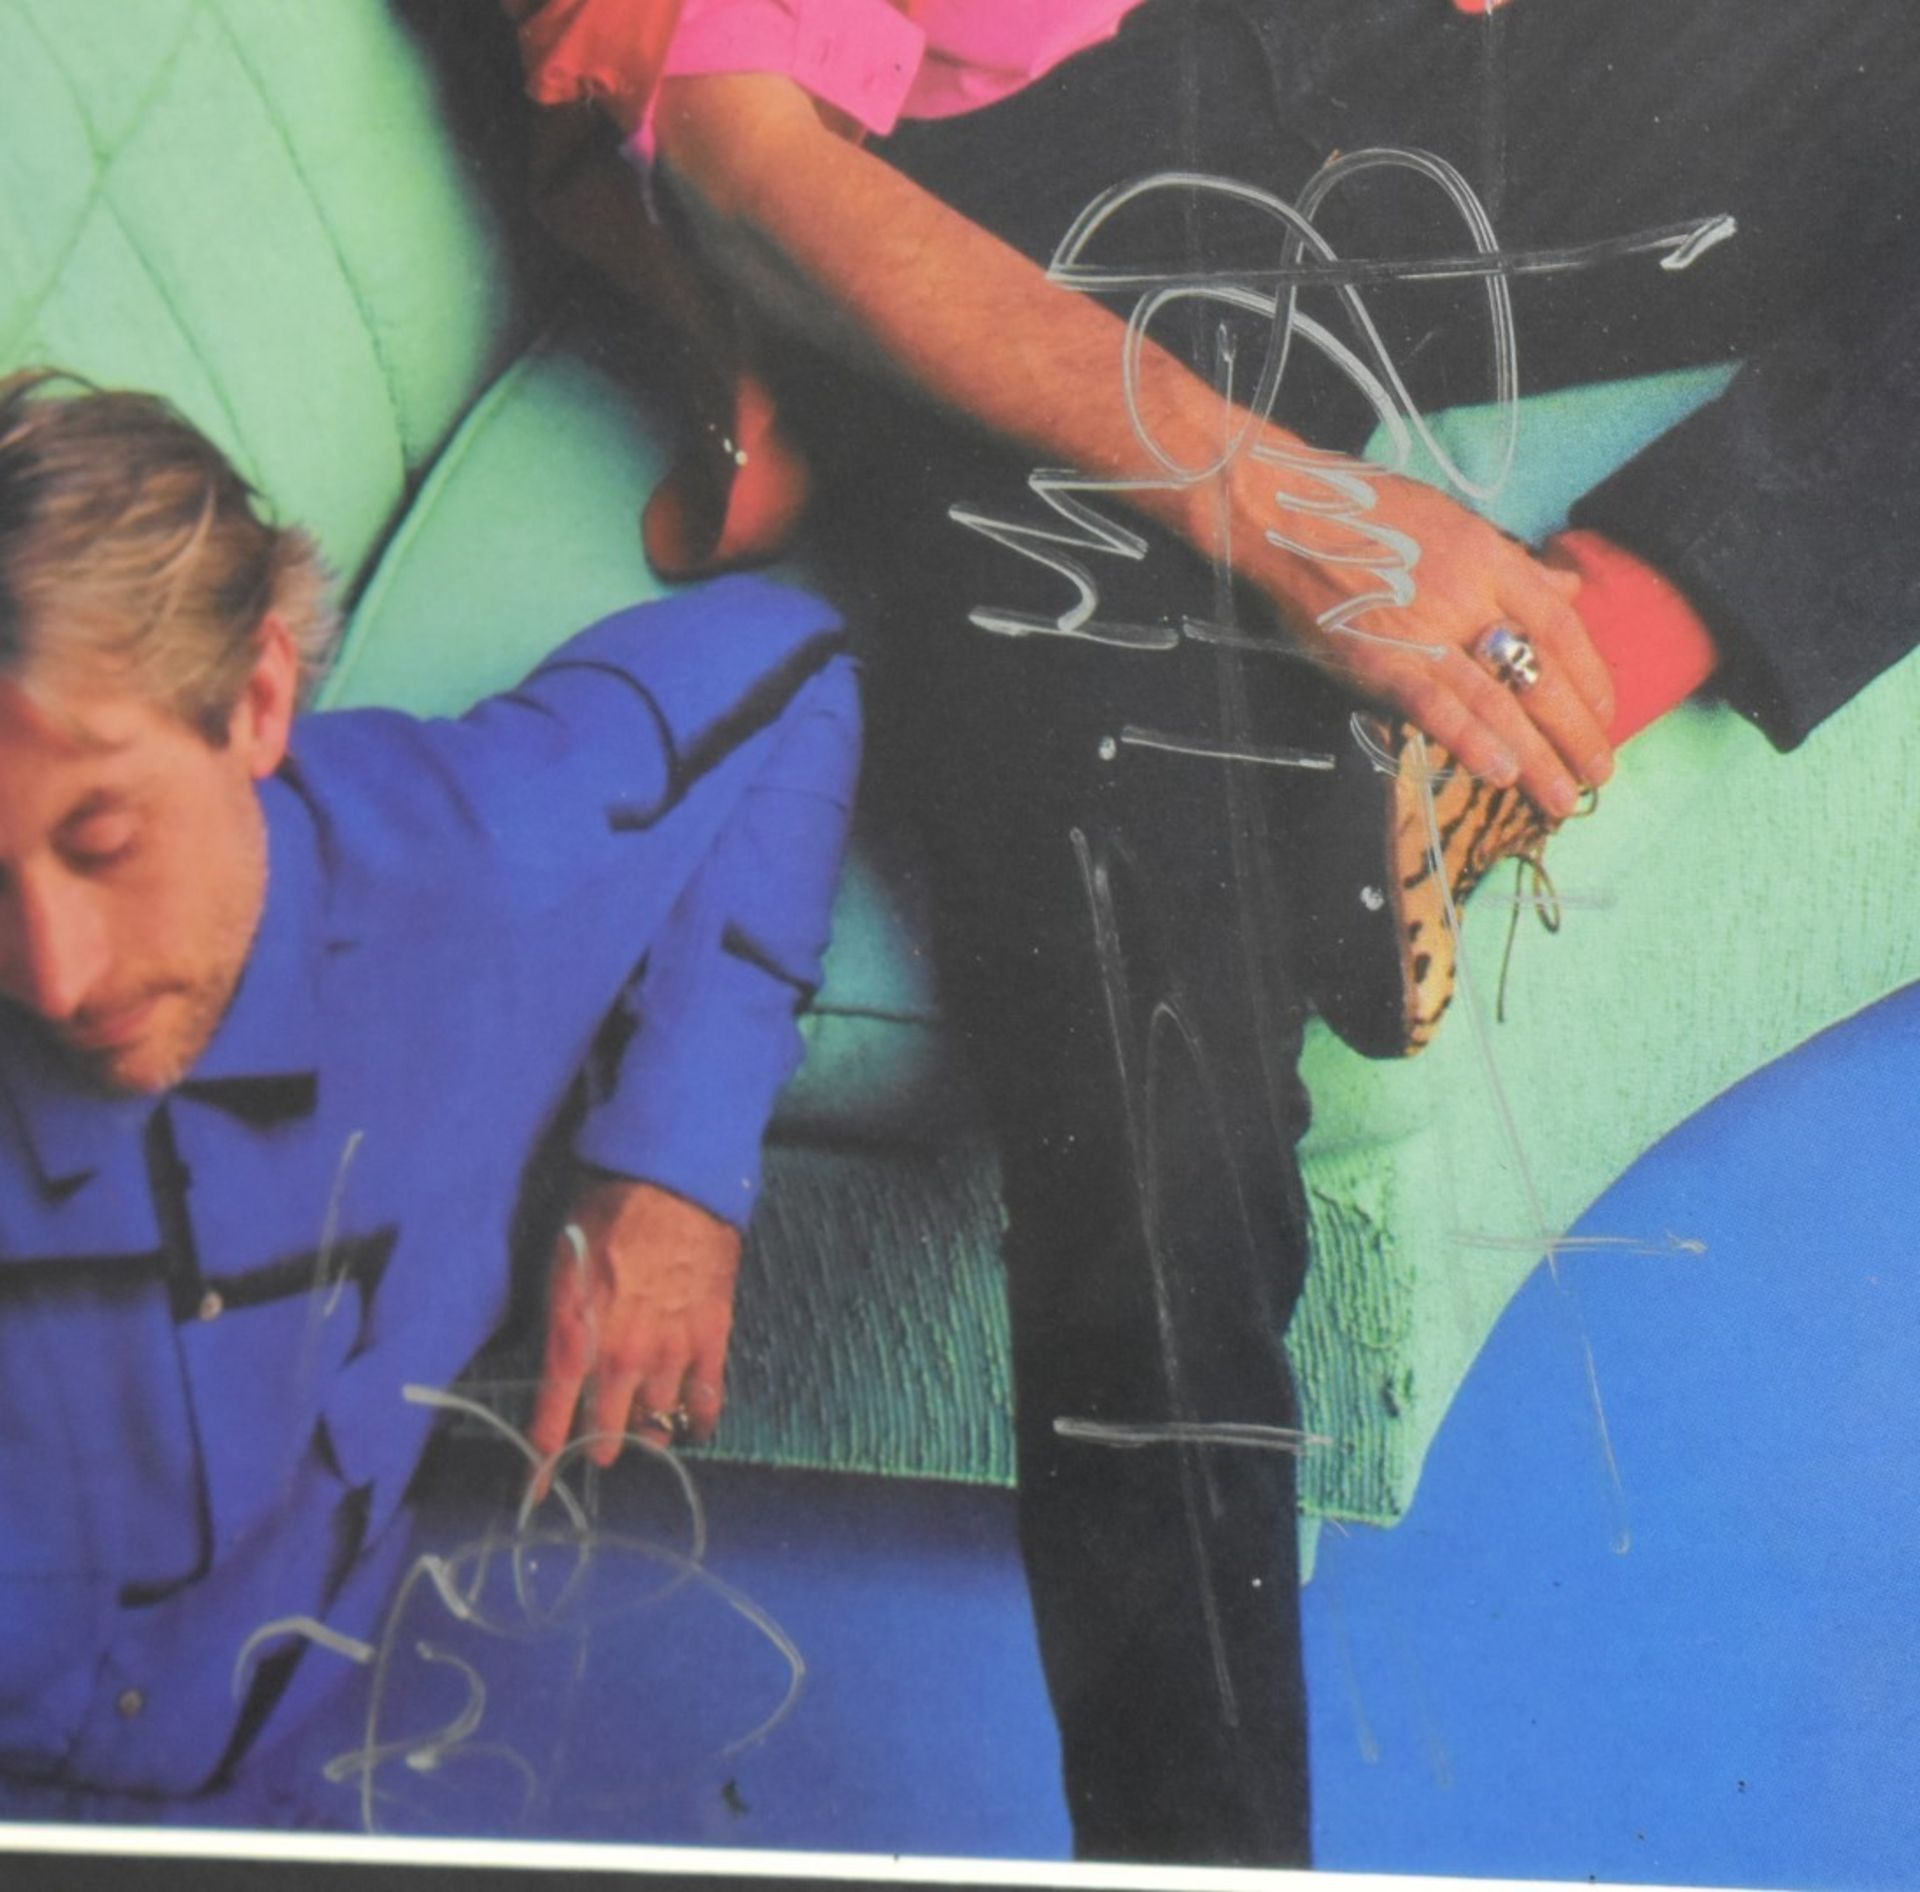 1 x Authentic ROLLING STONES Dirty Work Album Cover Signed By Jagger, Richards, Wood & Watts - Image 4 of 8